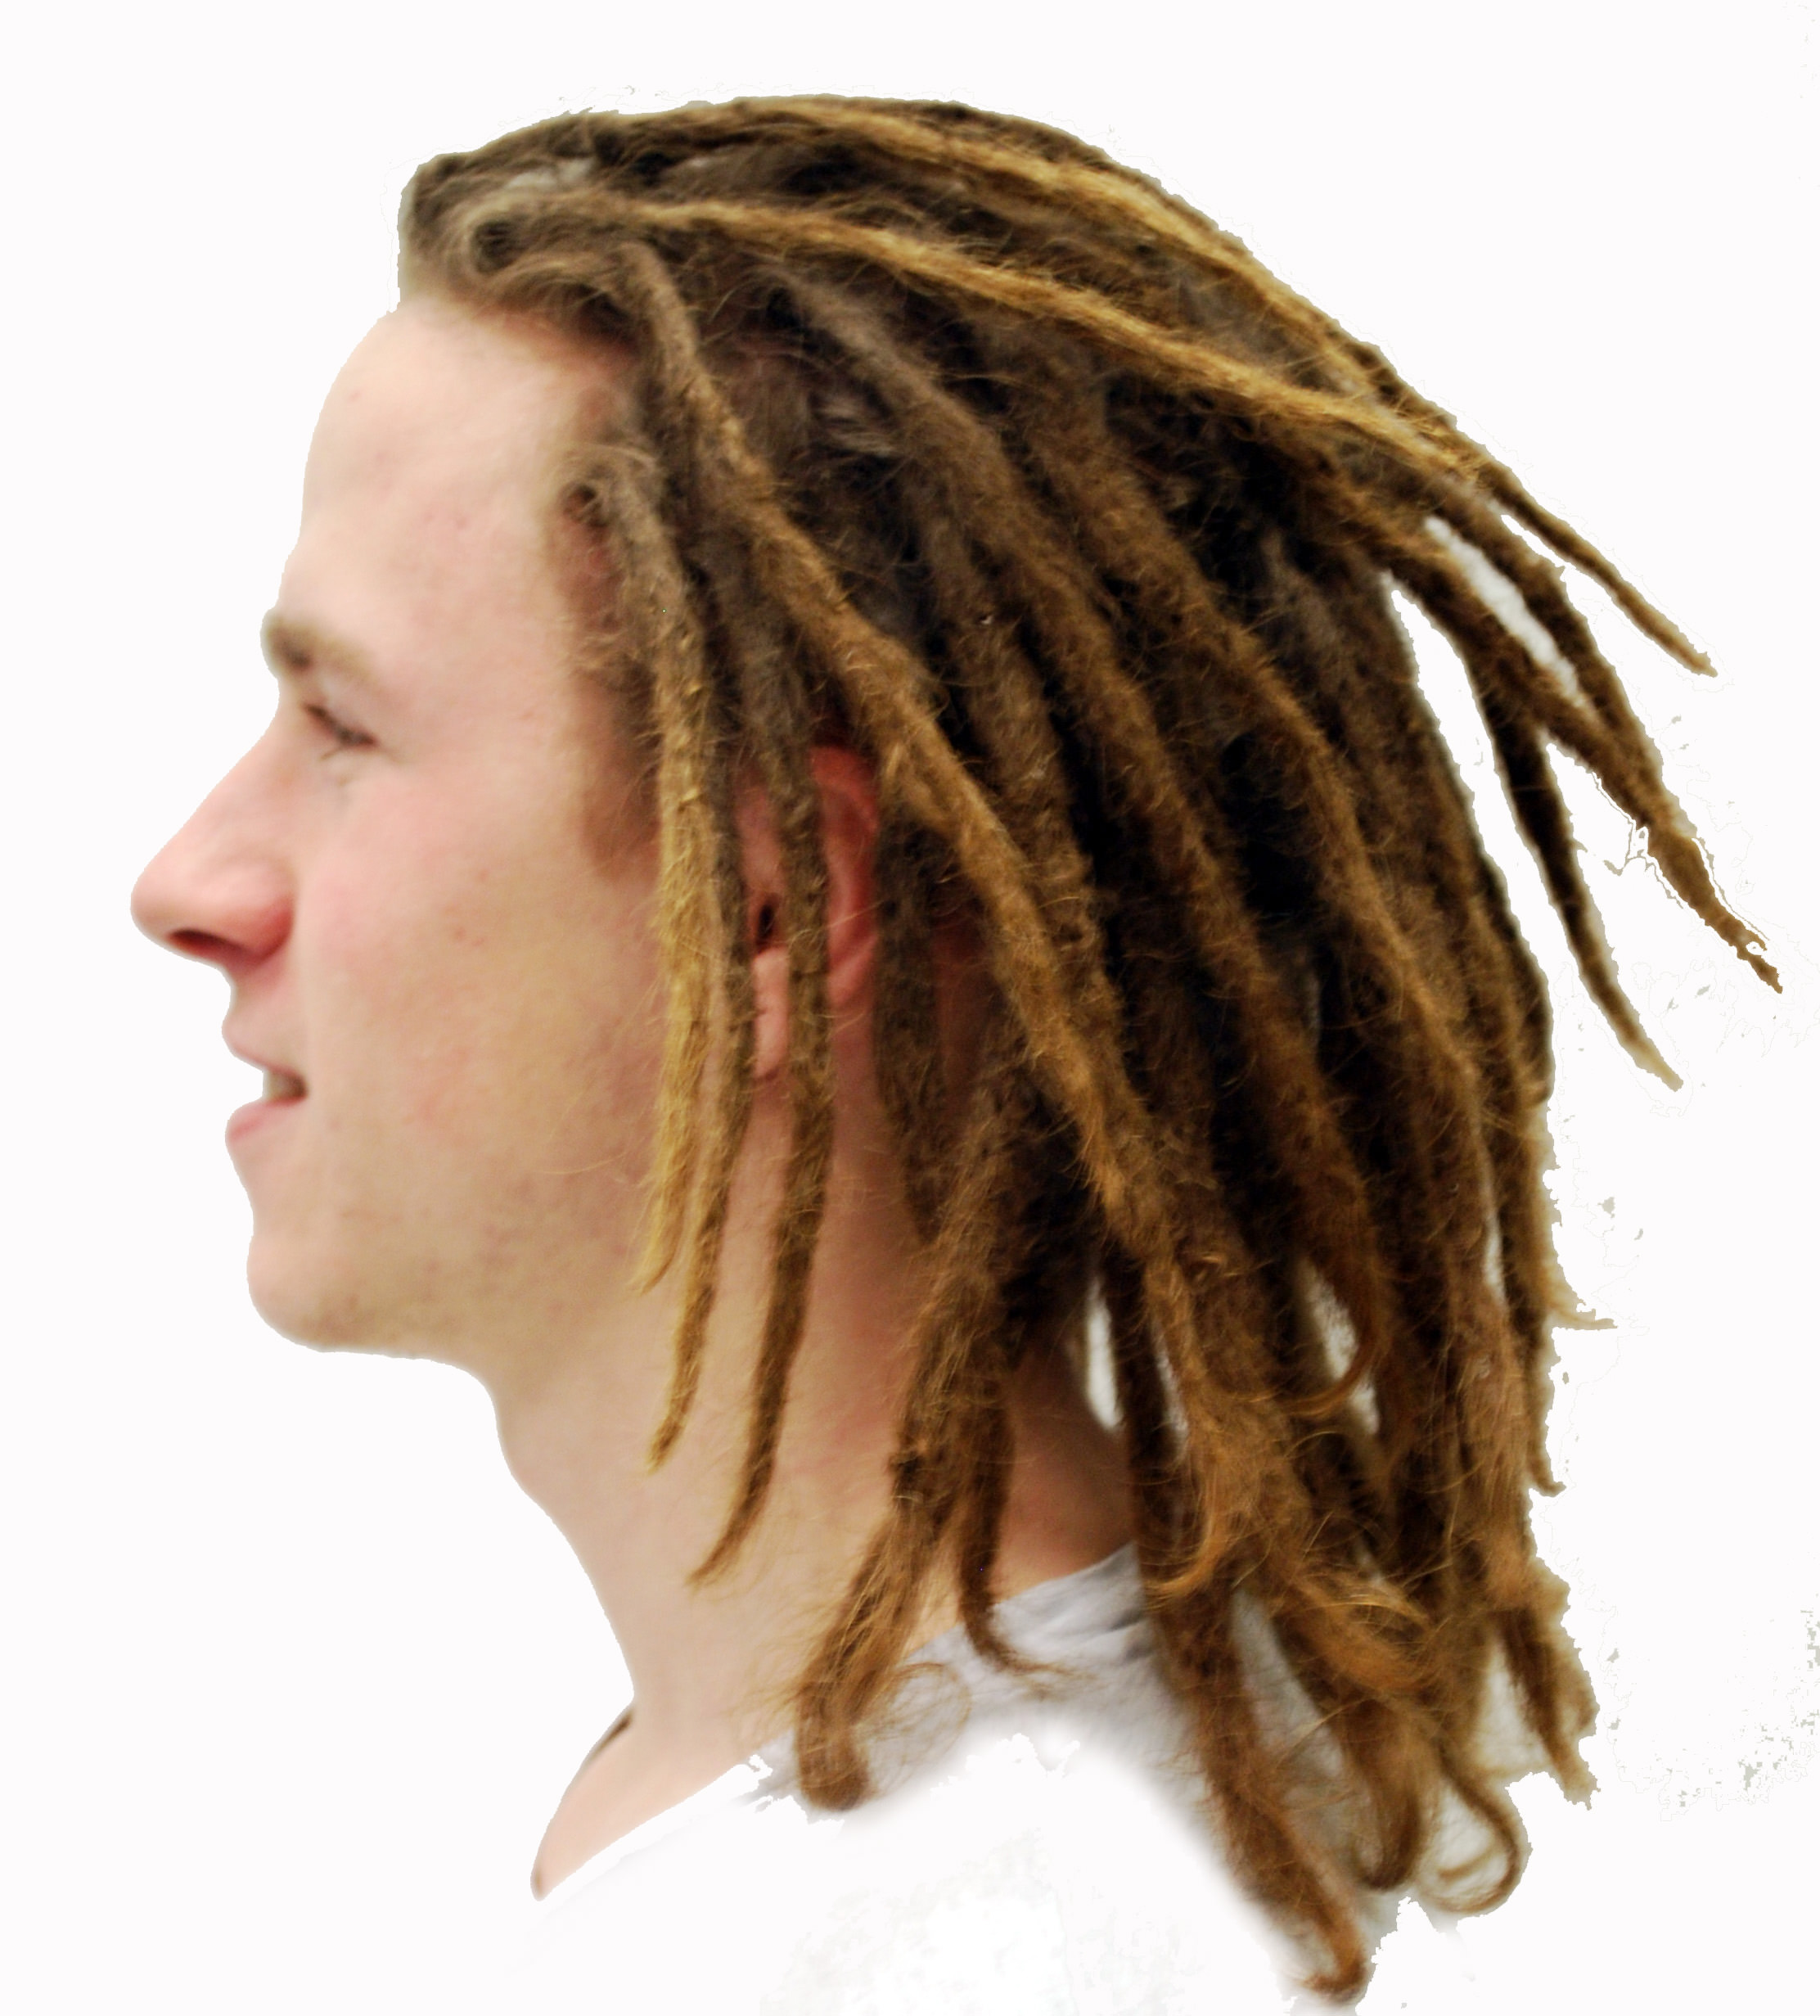 Things You Shouldn’t Say To People With Dreadlocks, #1 Especially!